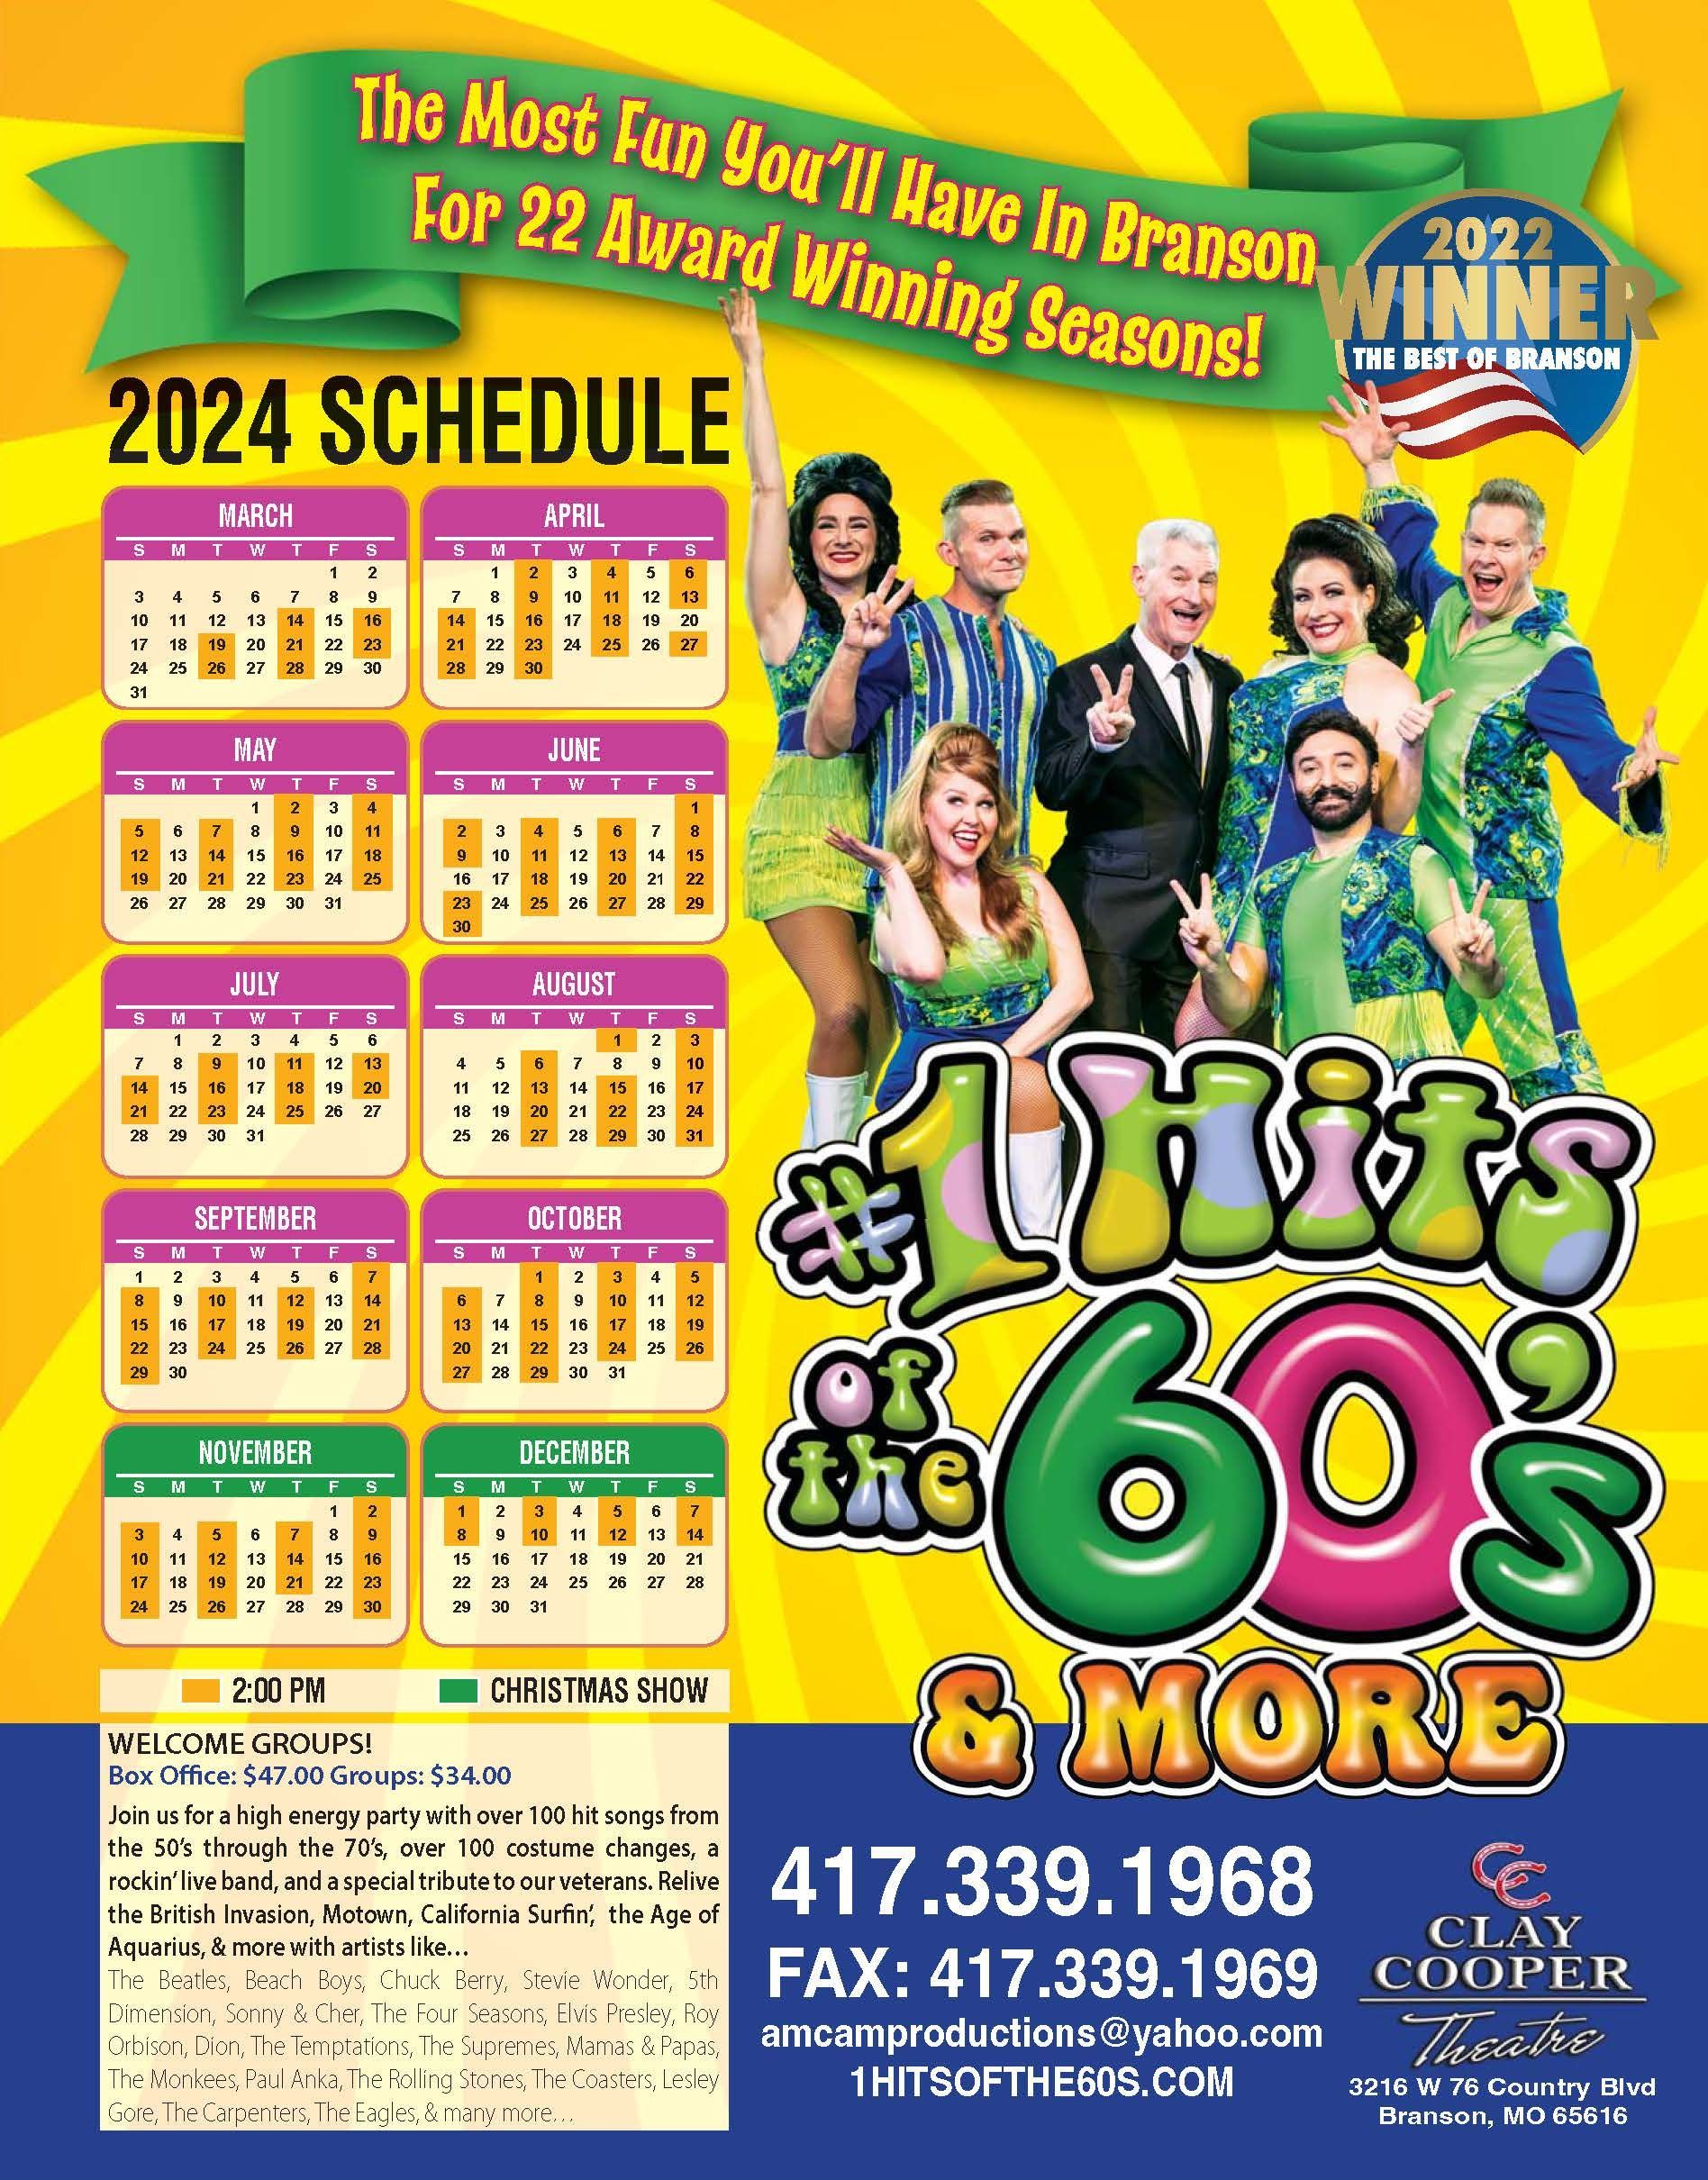 hits of the 60's show seating chart